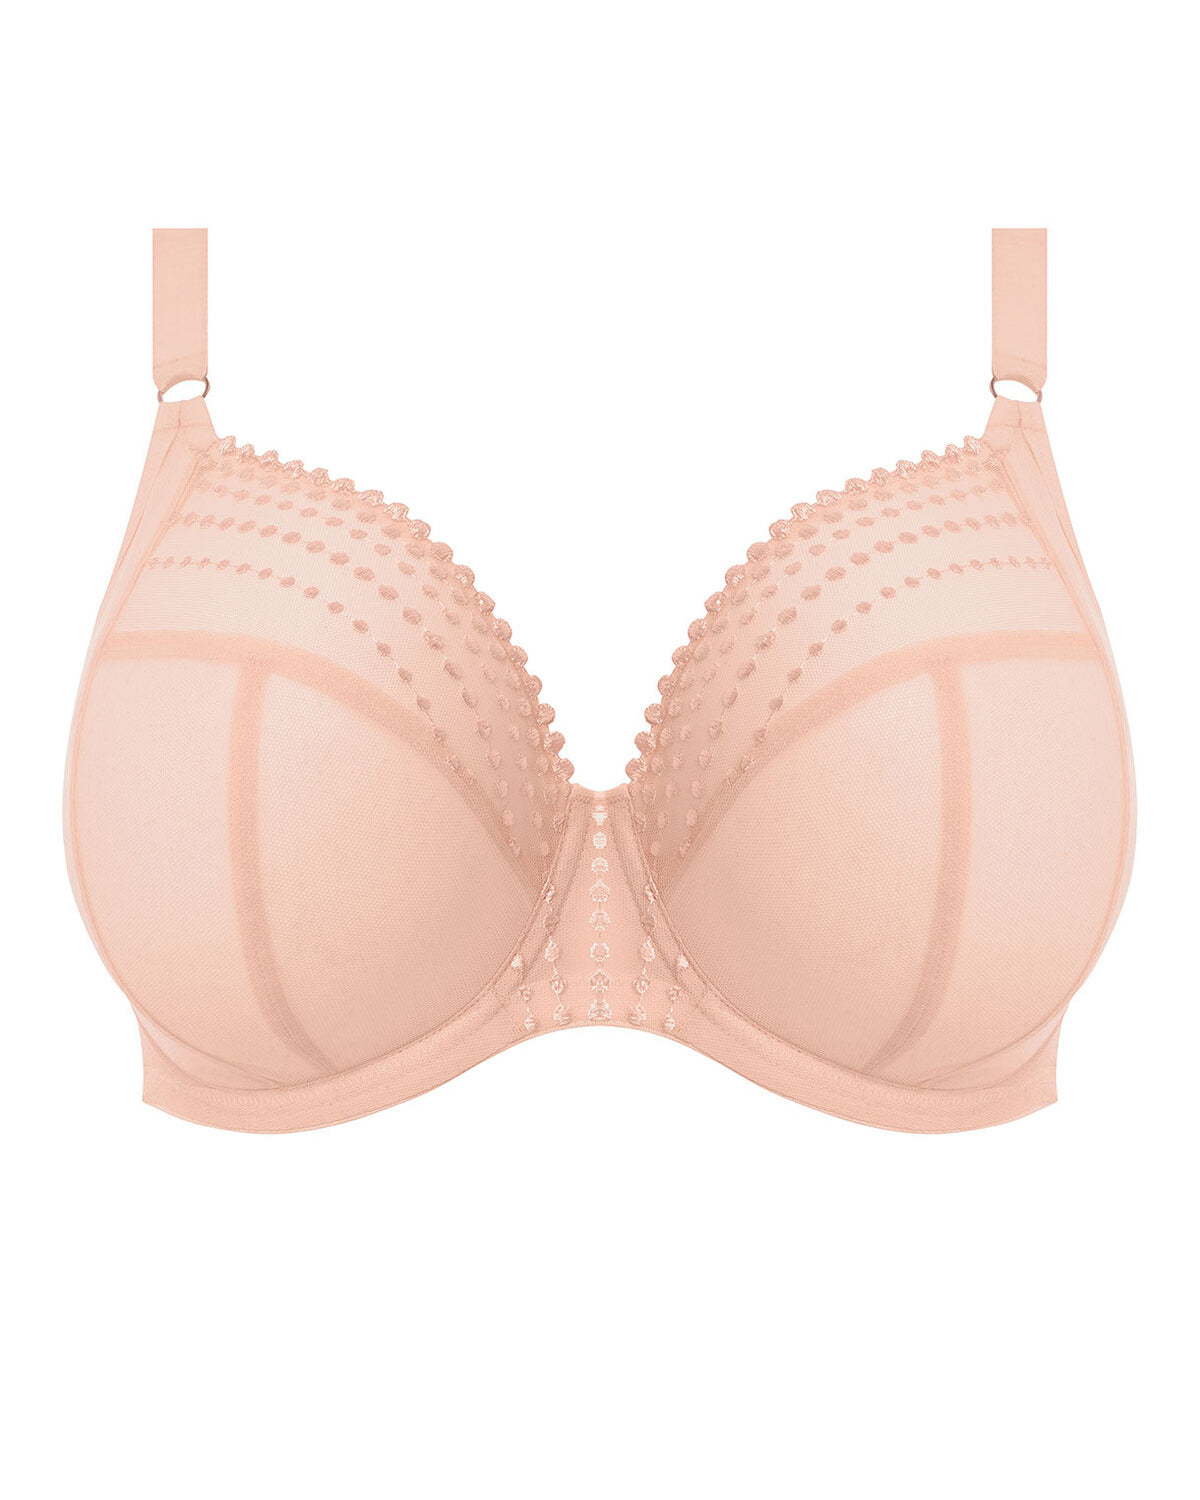 Flat lay of a mesh underwire plunge bra in pink